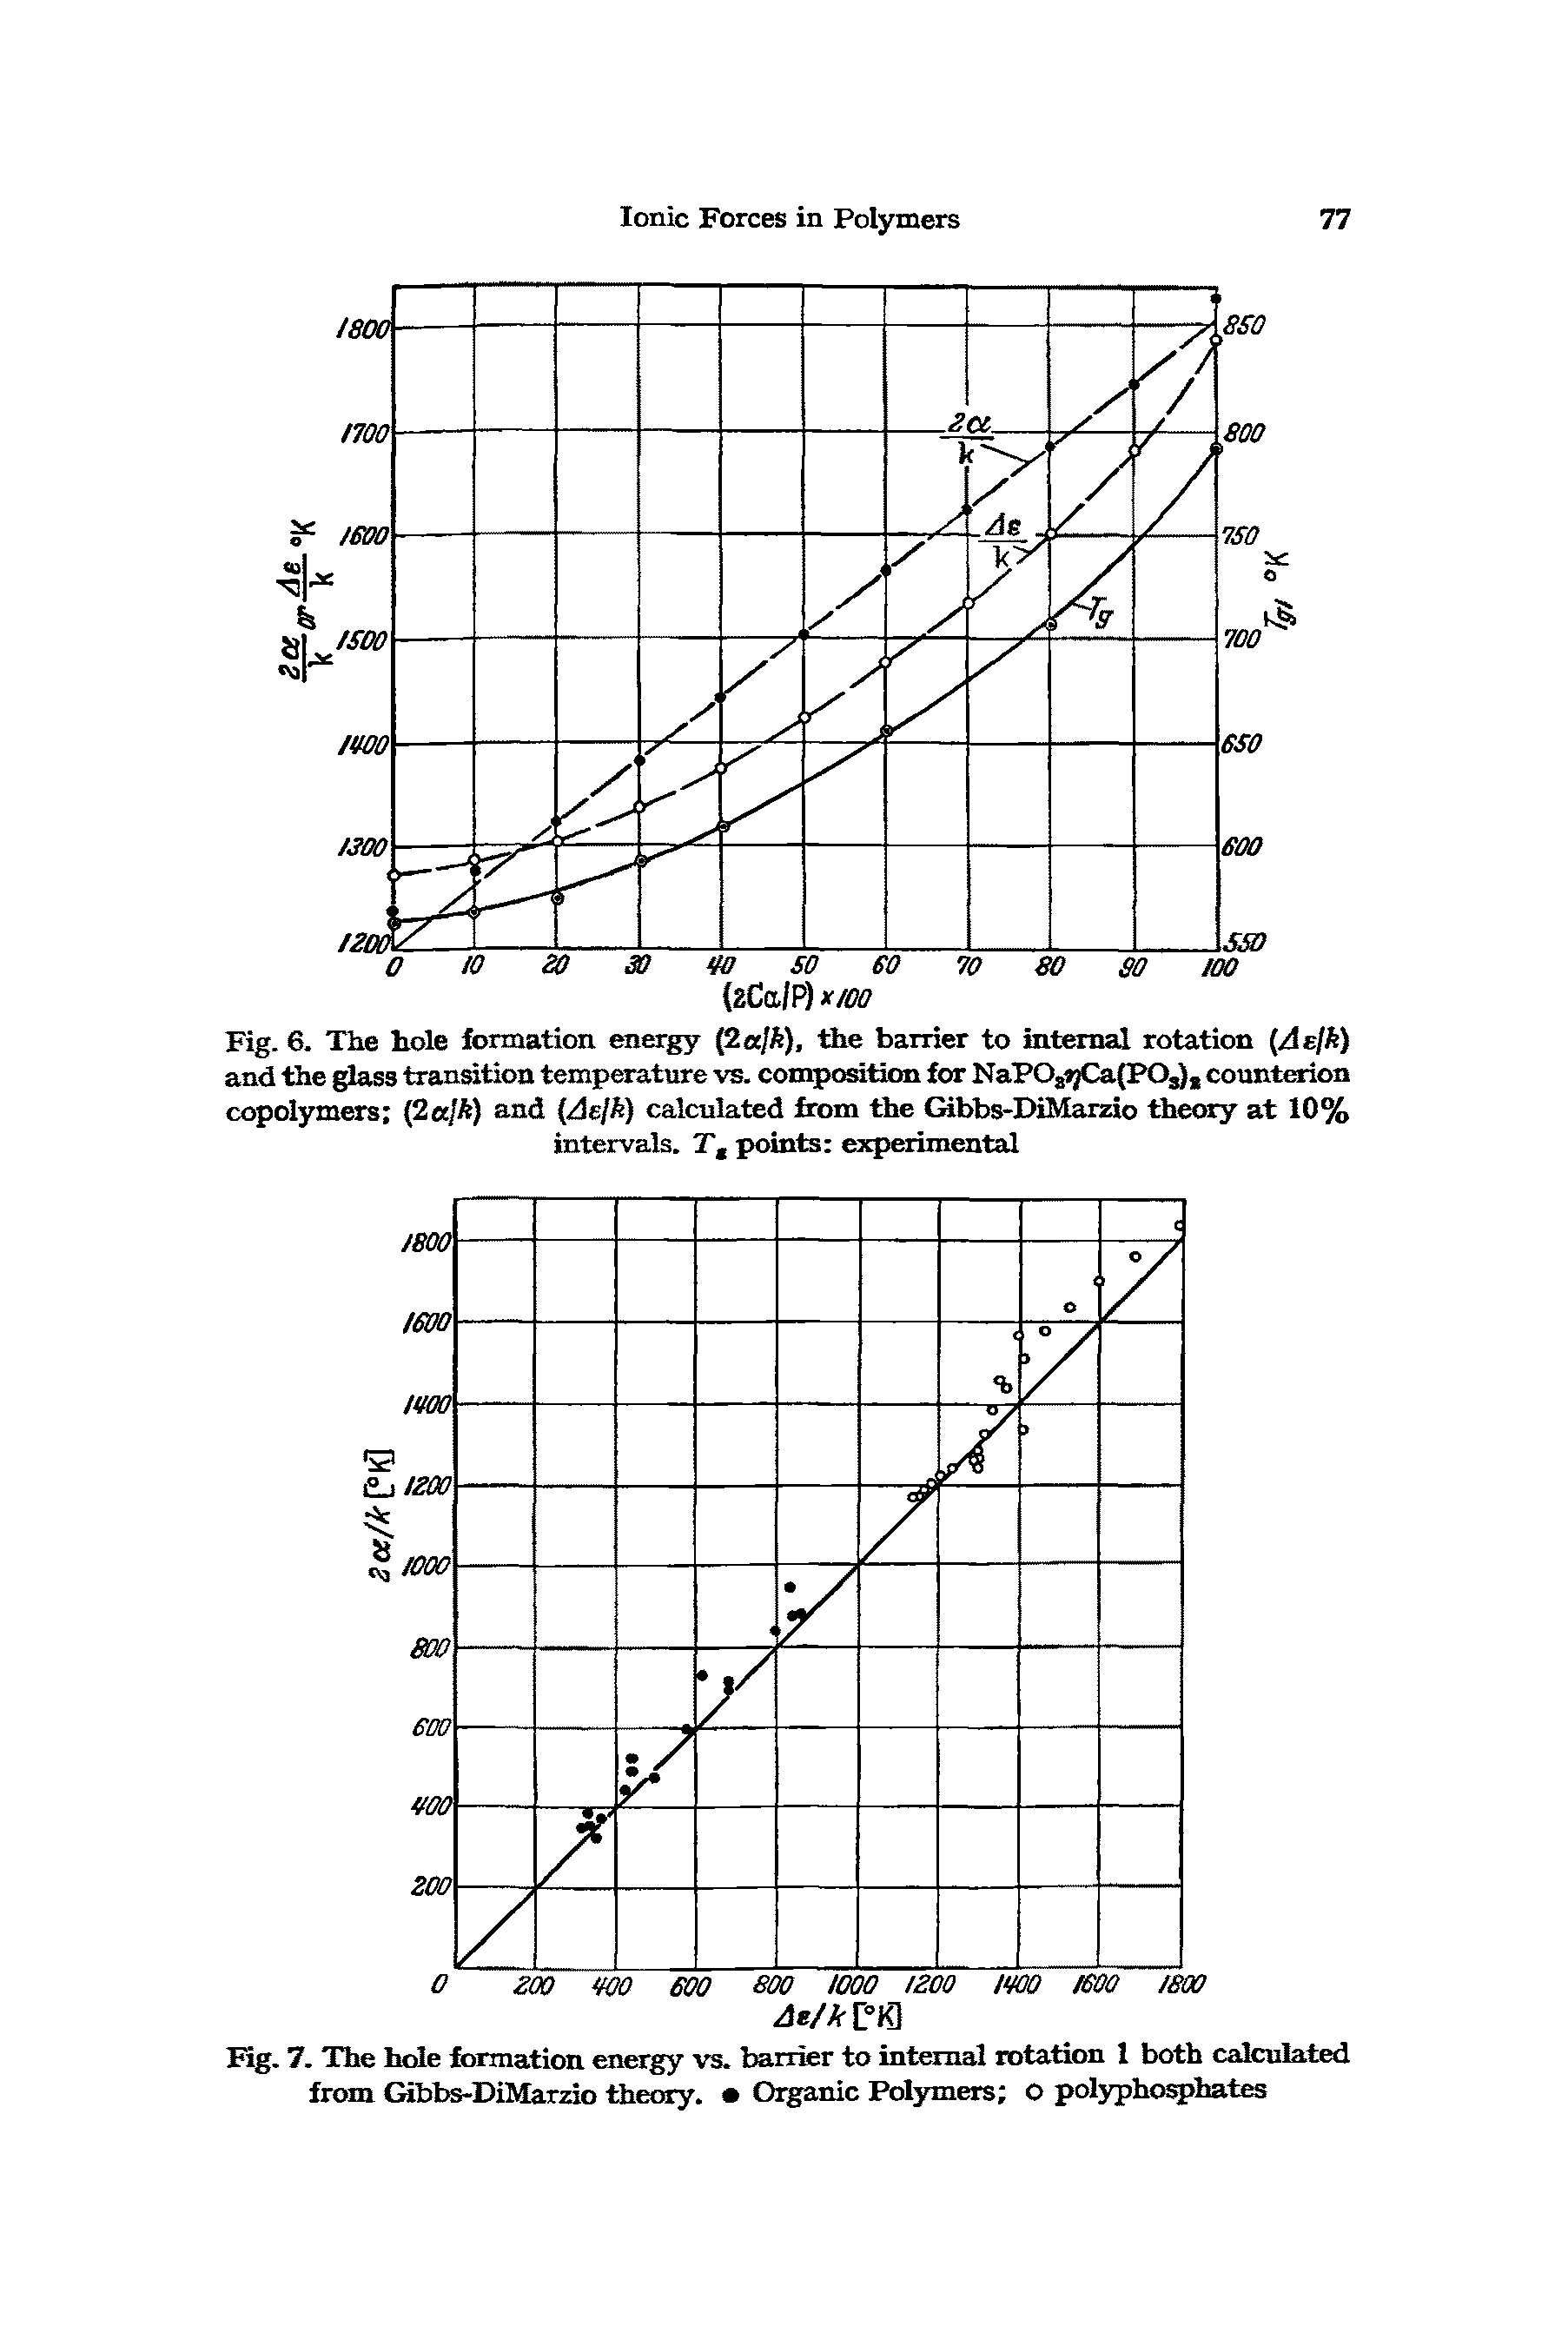 Fig. 6. The hole formation energy 2ajk), the barrier to internal rotation (/de/fi) and the glass transition temperature vs. compoafdon for NaPOjijCa(PO, counterion copolymers (2 /ft) and (Aelk) calculated from the Gibbs-DiMarzio theory at 10% intervals. T, points experimental...